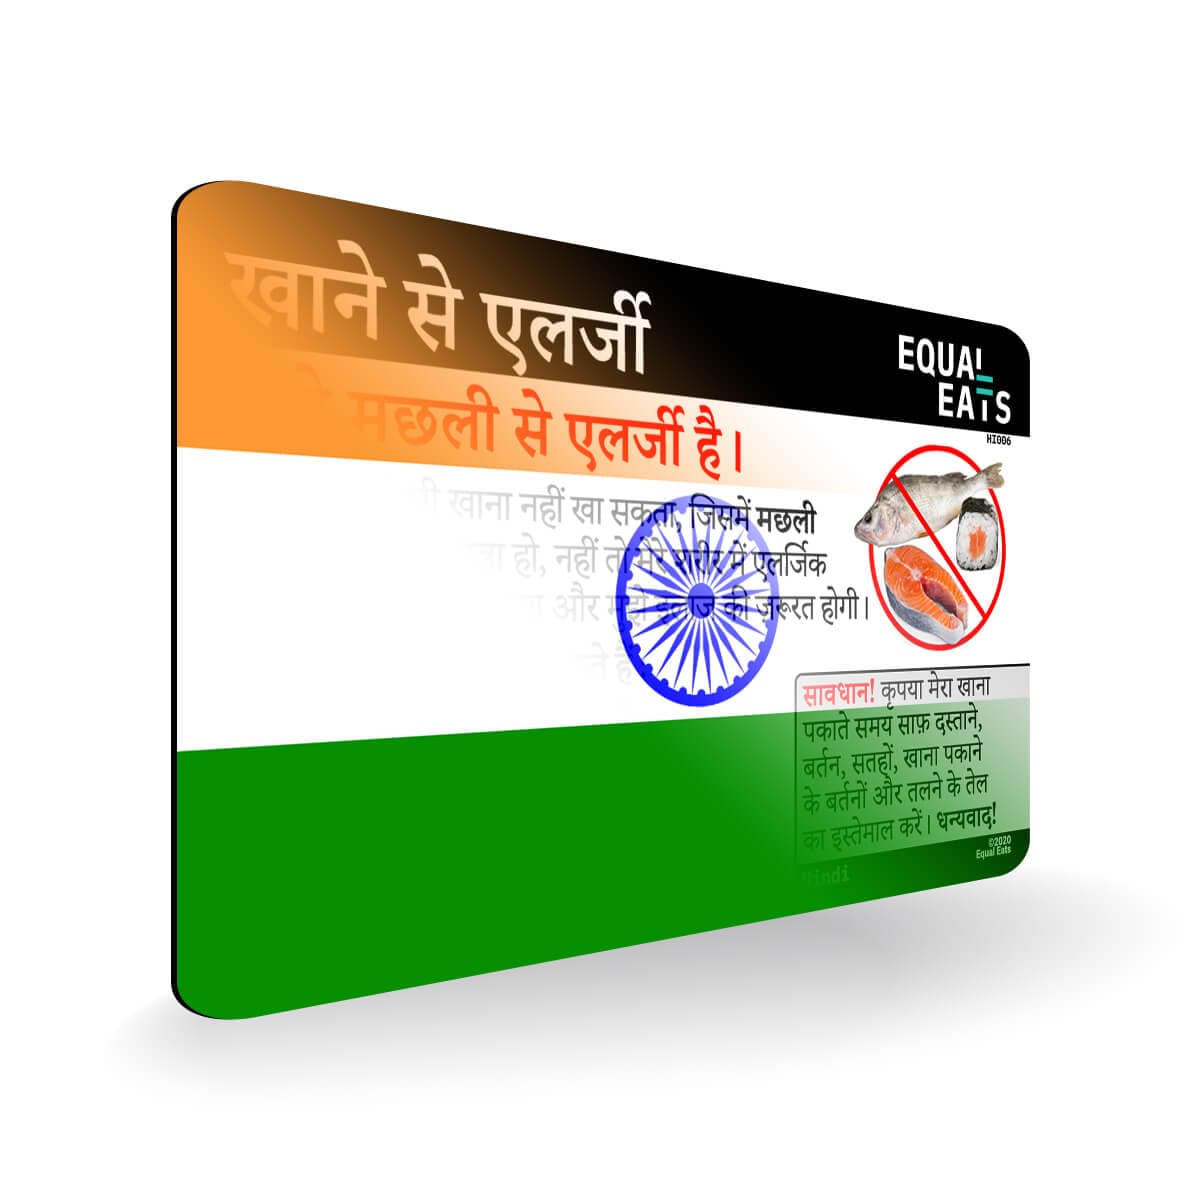 Fish Allergy in Hindi. Fish Allergy Card for India